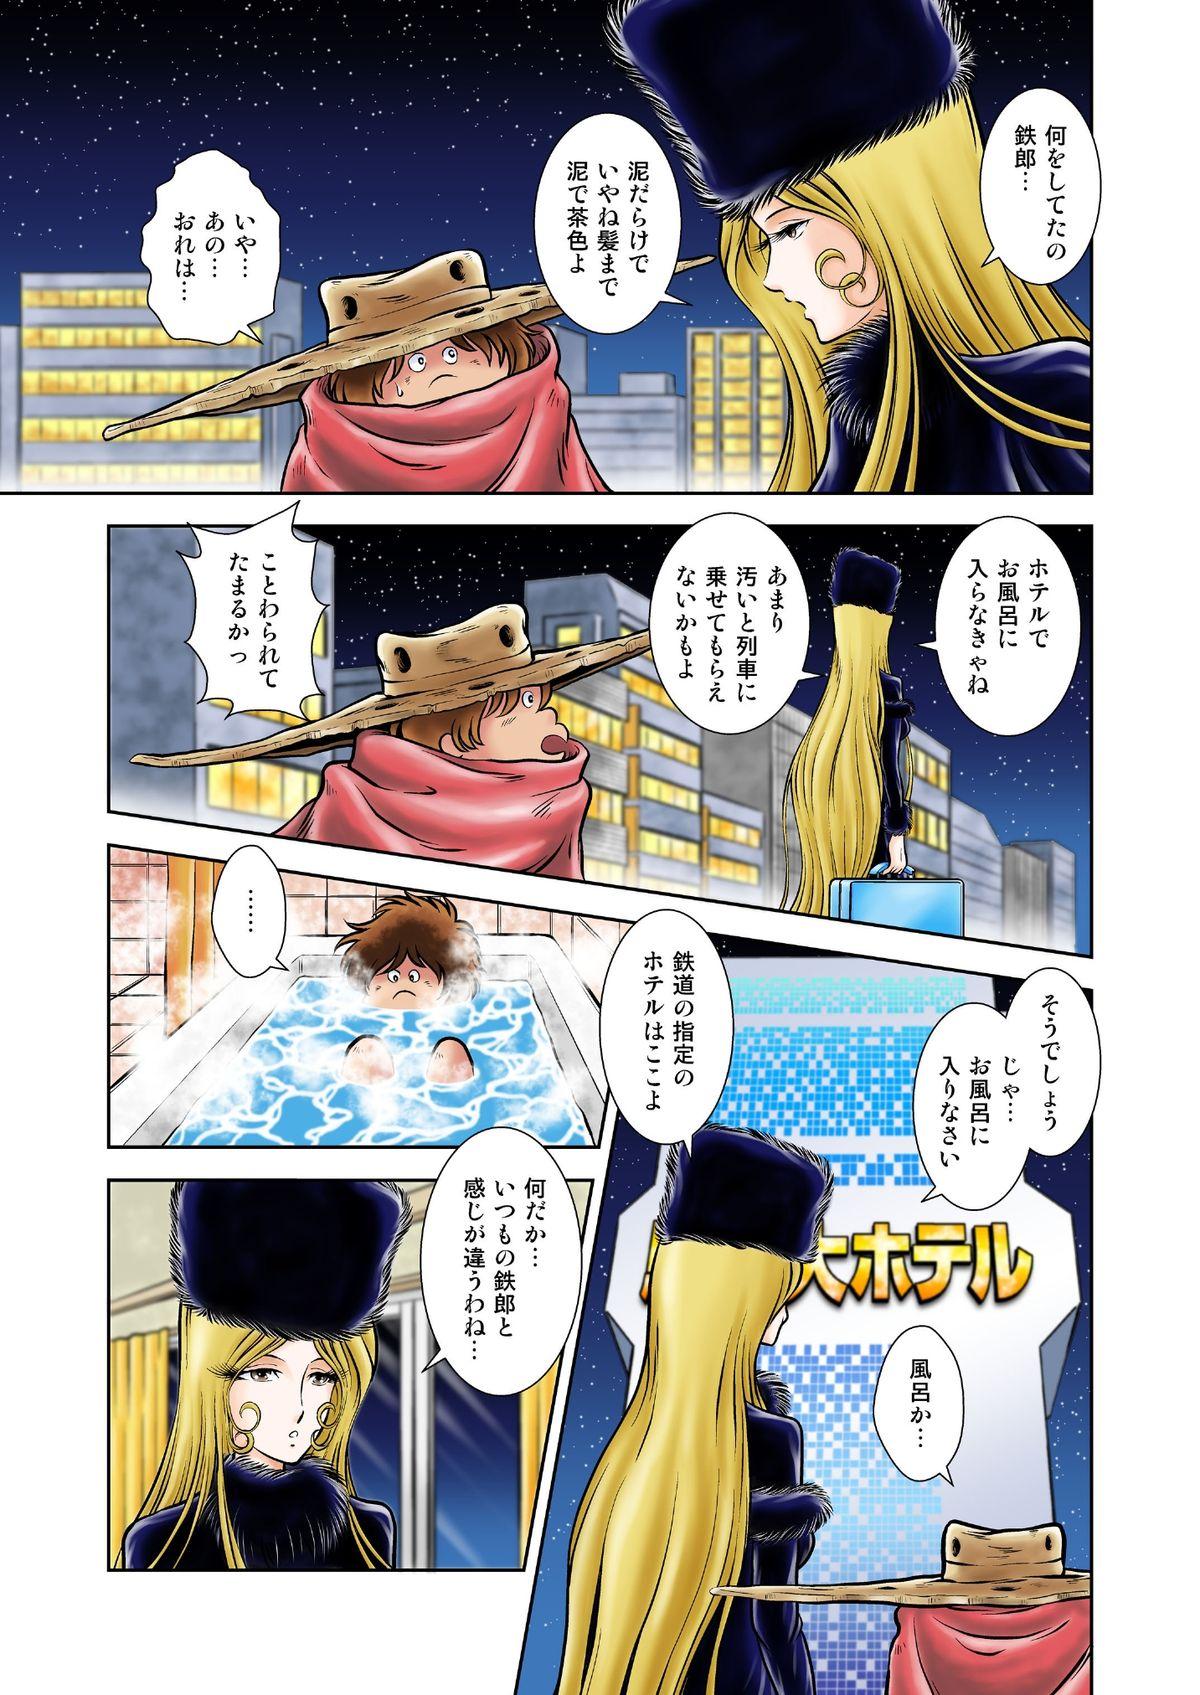 Forwomen Maetel Story 15 - Galaxy express 999 Breast - Page 5